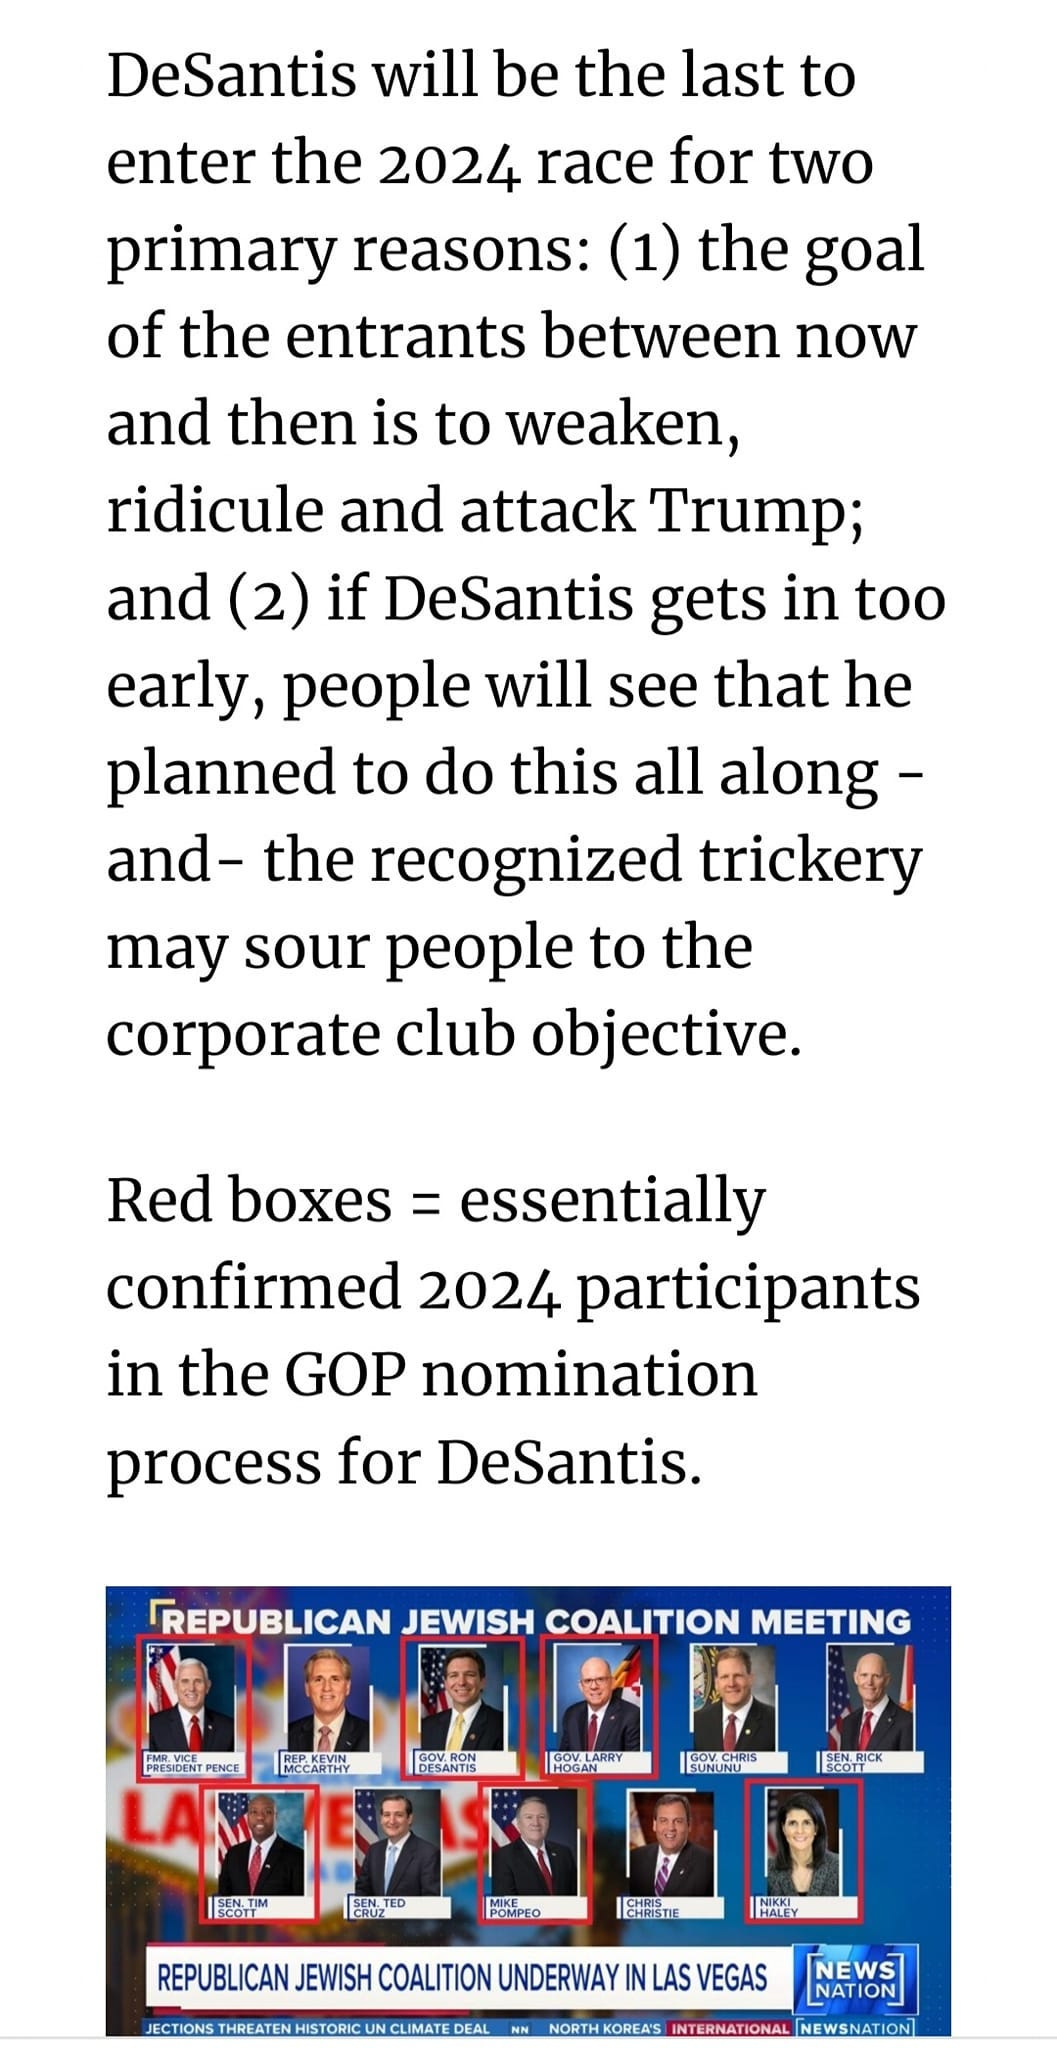 May be an image of 5 people and text that says 'DeSantis will be the last to enter the 2024 race for two primary reasons: (1) the goal of the entrants between now and then is to weaken, ridicule and attack Trump; and (2) if DeSantis gets in too early, people will see that he planned to do this all along- and- the recognized trickery may sour people to the corporate club objective. Red boxes essentially confirmed 2024 participants in the GOP nomination process for DeSantis. REPUBLICAN JEWISH COALITION MEETING PHEPUE 15 EAN REPUBLICAN JEWISH COALITION UNDERWAY LAS VEGAS NES NOETHEOREAS NTERNATIONA'